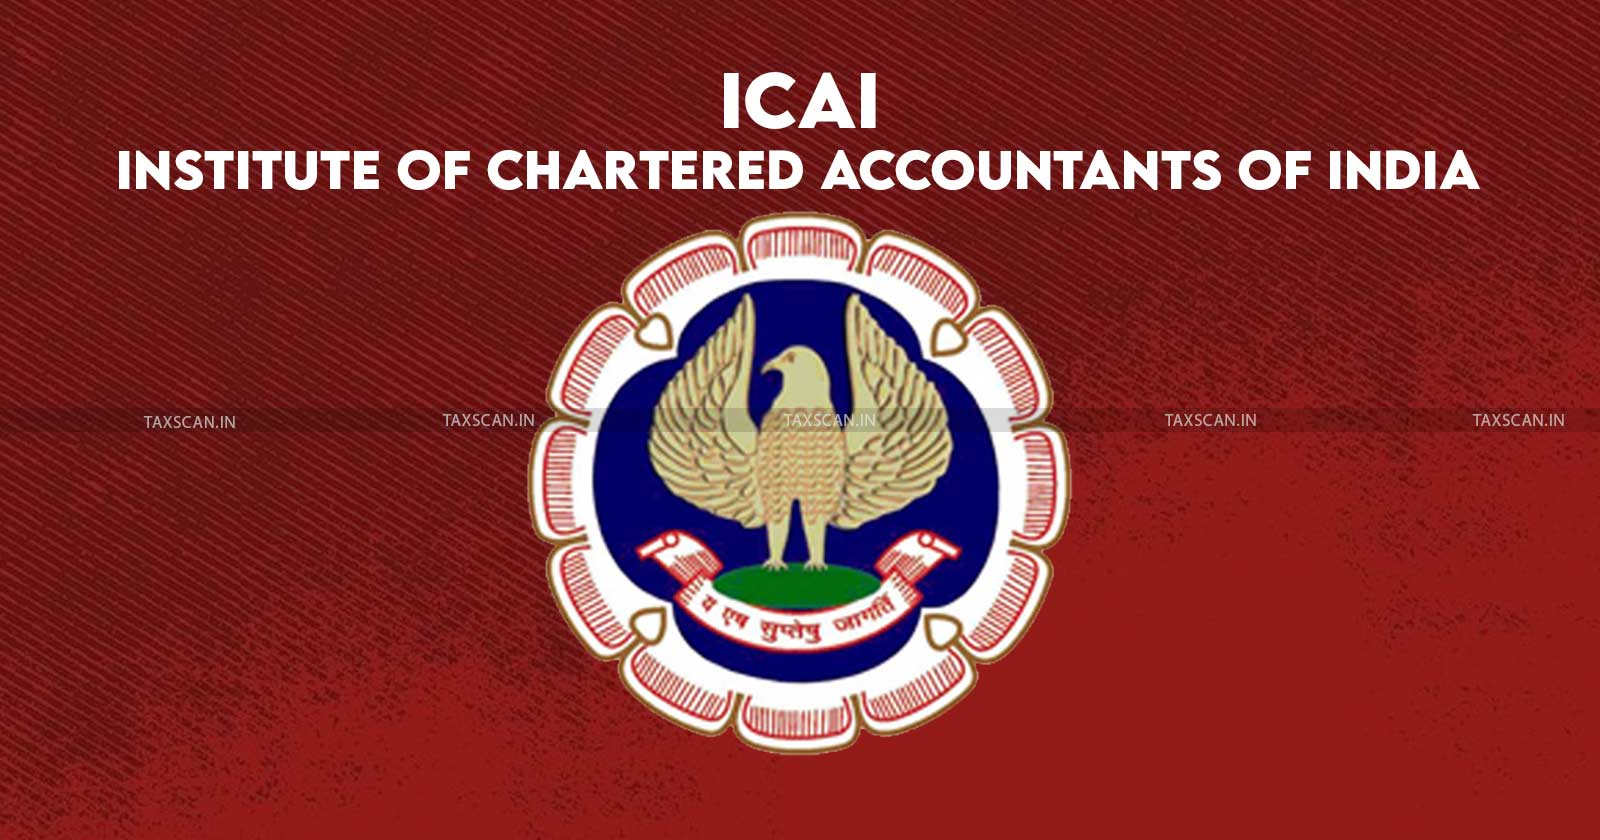 Non-Verification -Documents -MCA -SPICe Certification - ICAI -Penalty -CA-taxscan